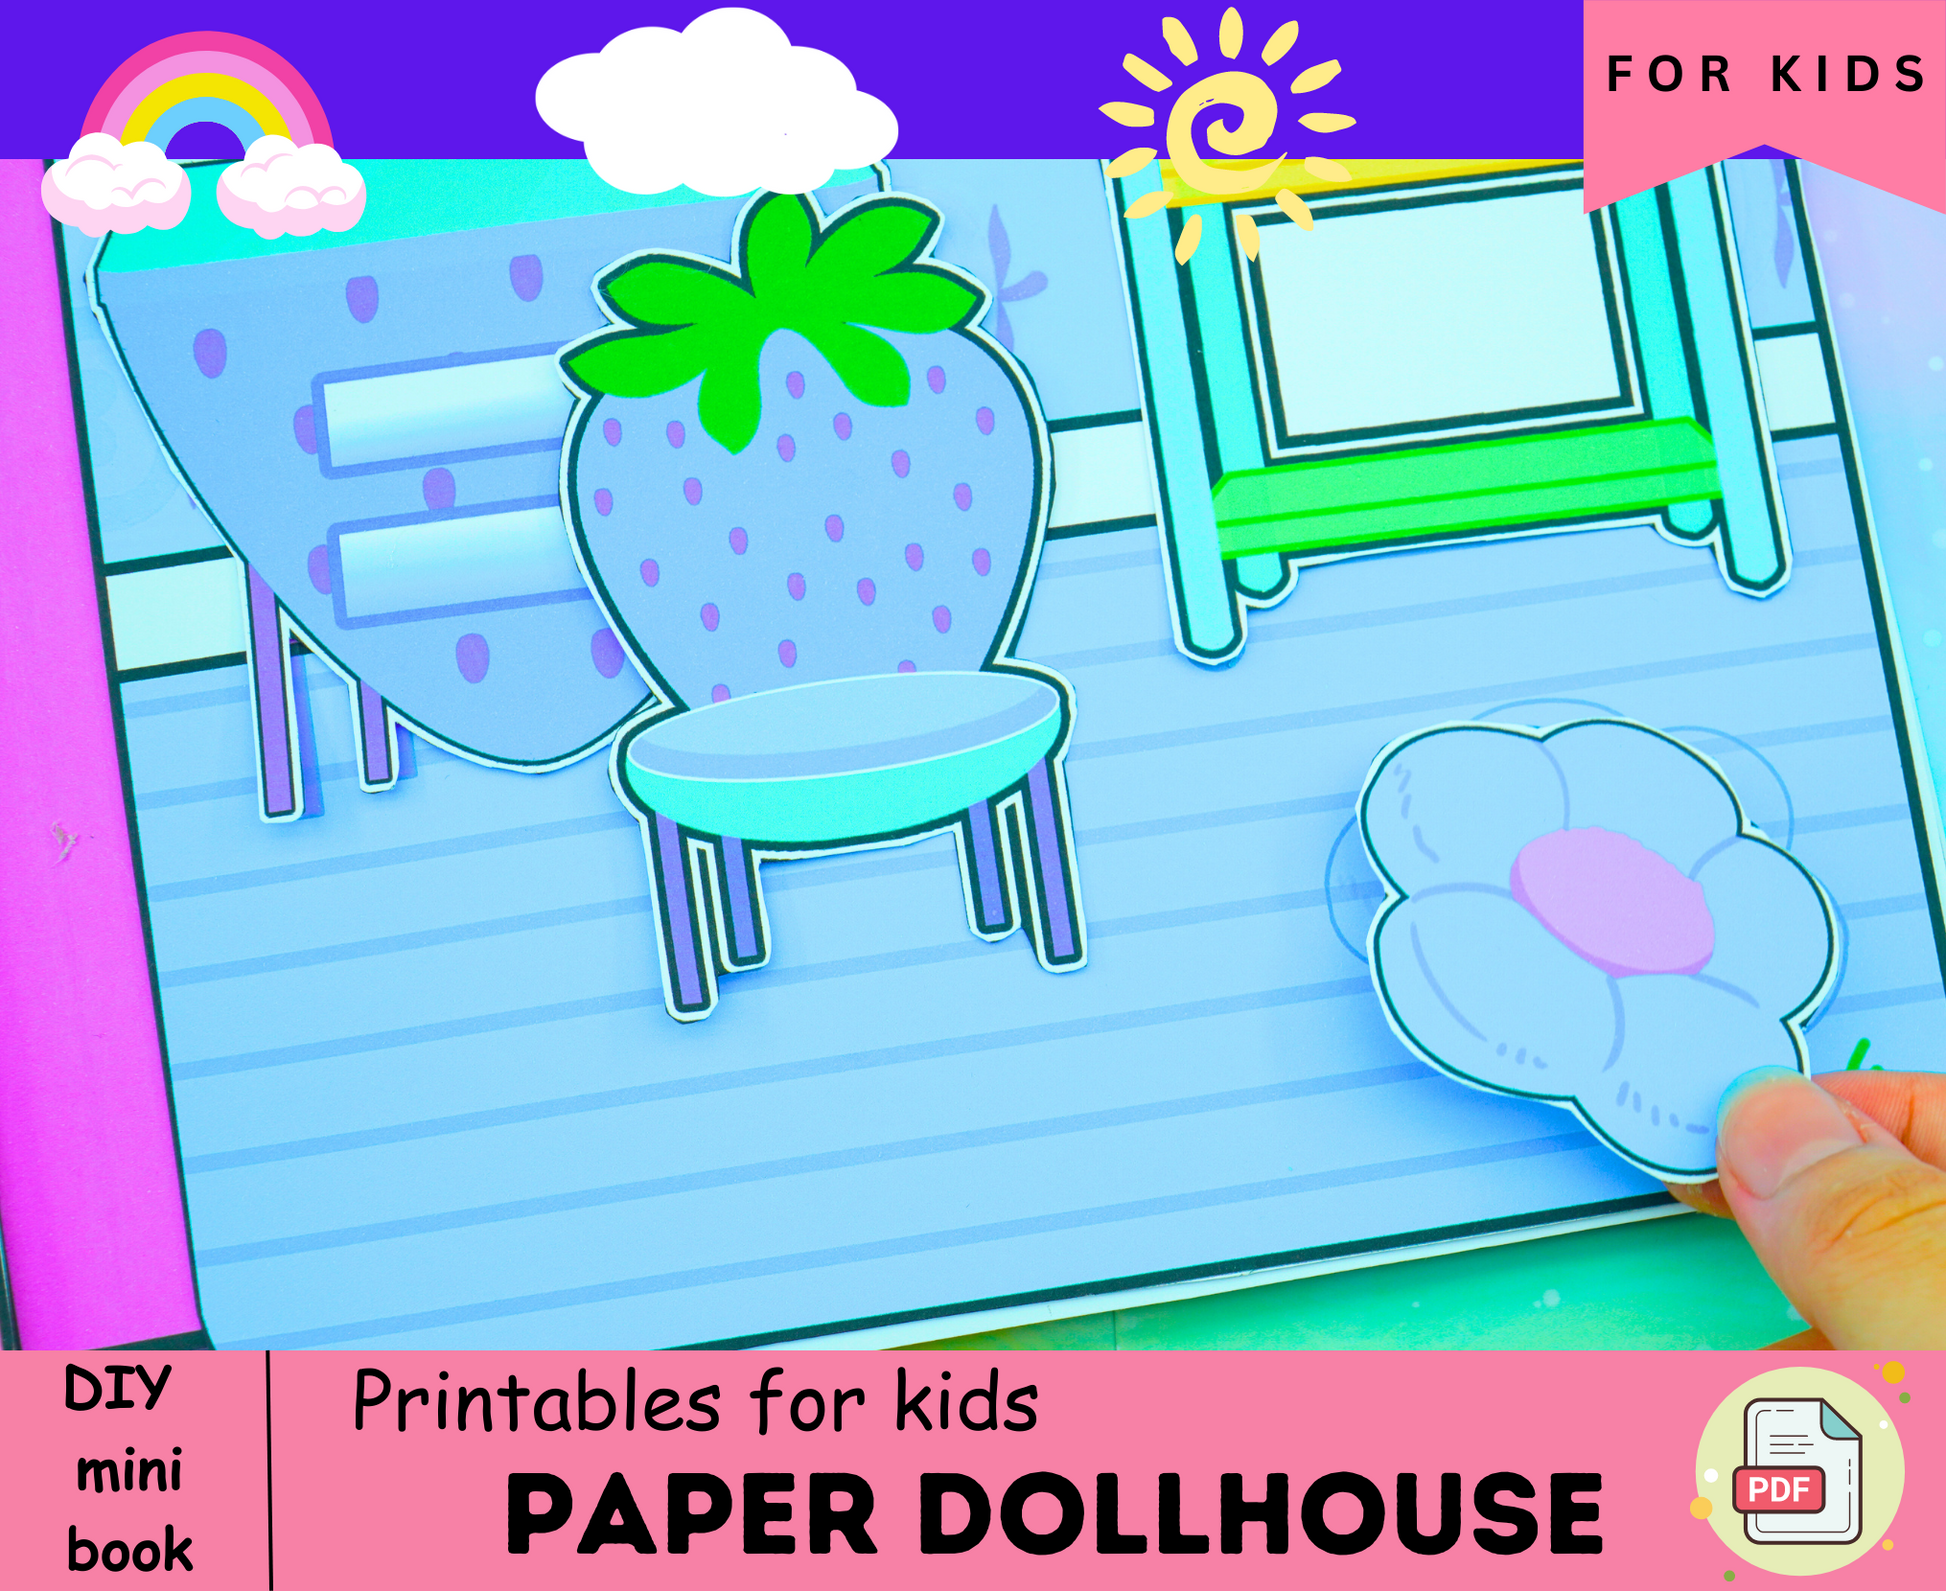 Printable Toca Boca Family Paper Doll Bedrooms / Paper Doll Mom